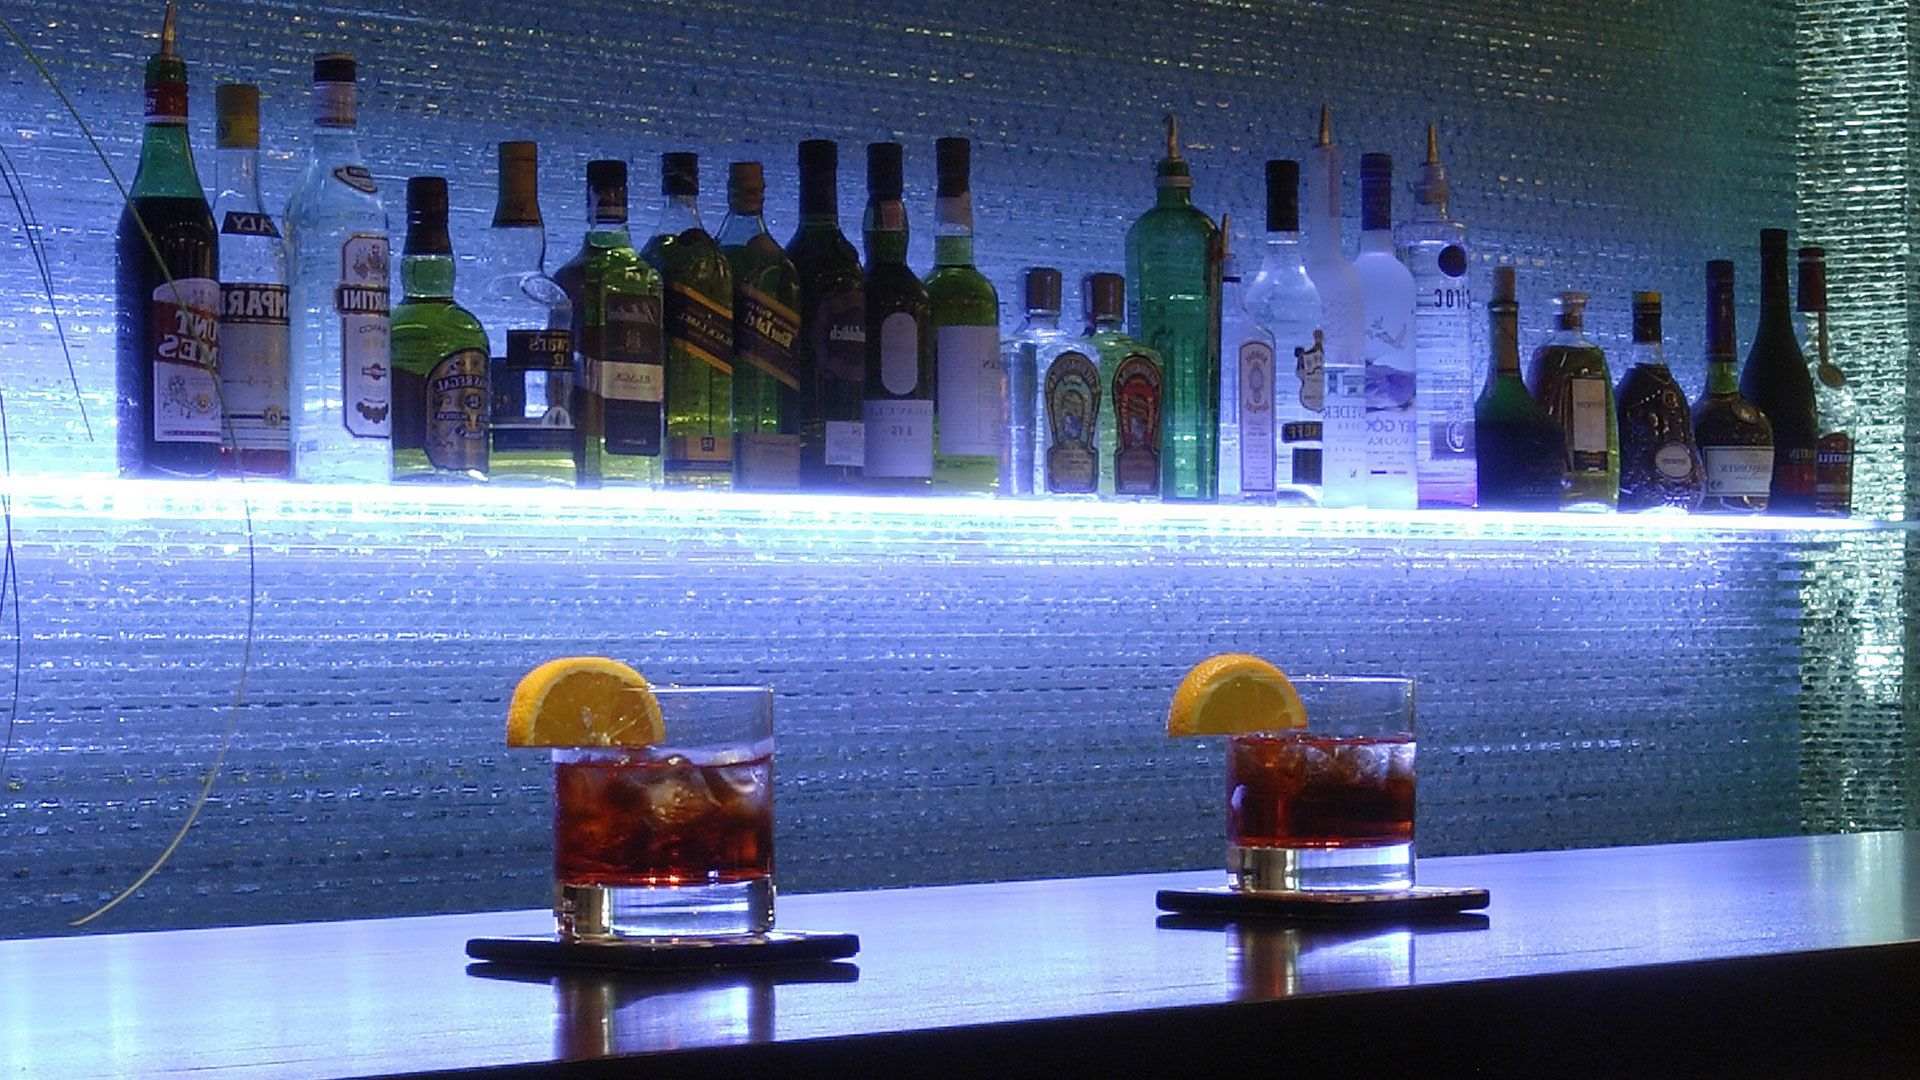 Drinks served at the hotel bar